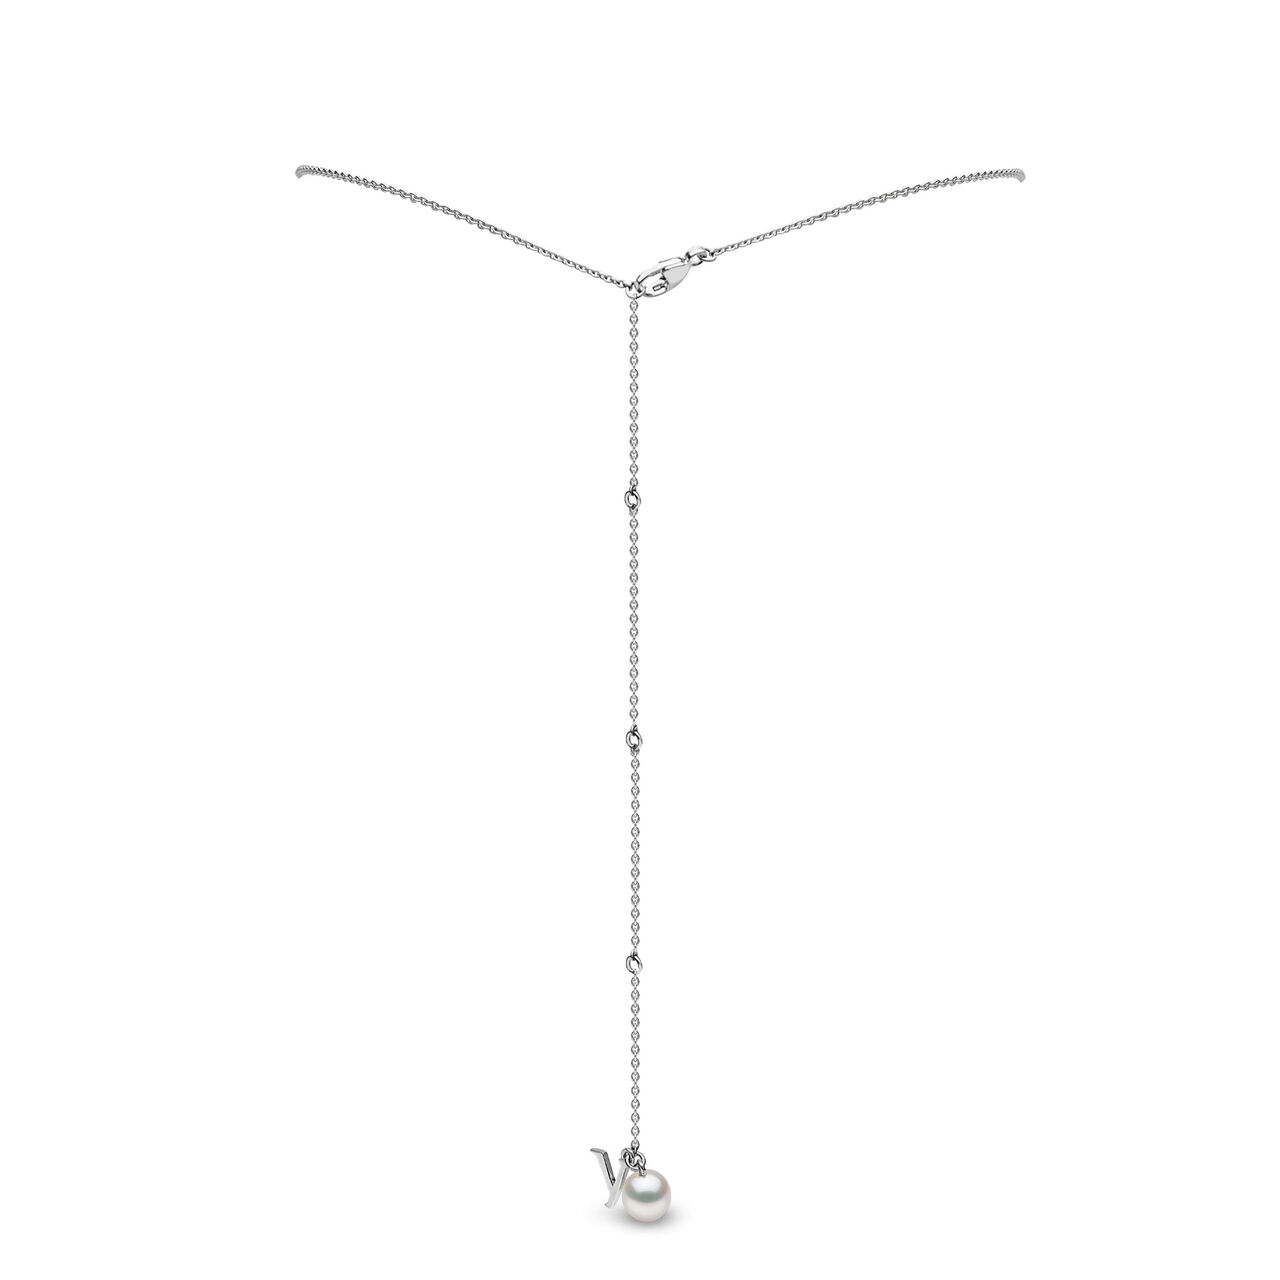 Trend White Gold Pearl and Diamond Necklace, Yoko London